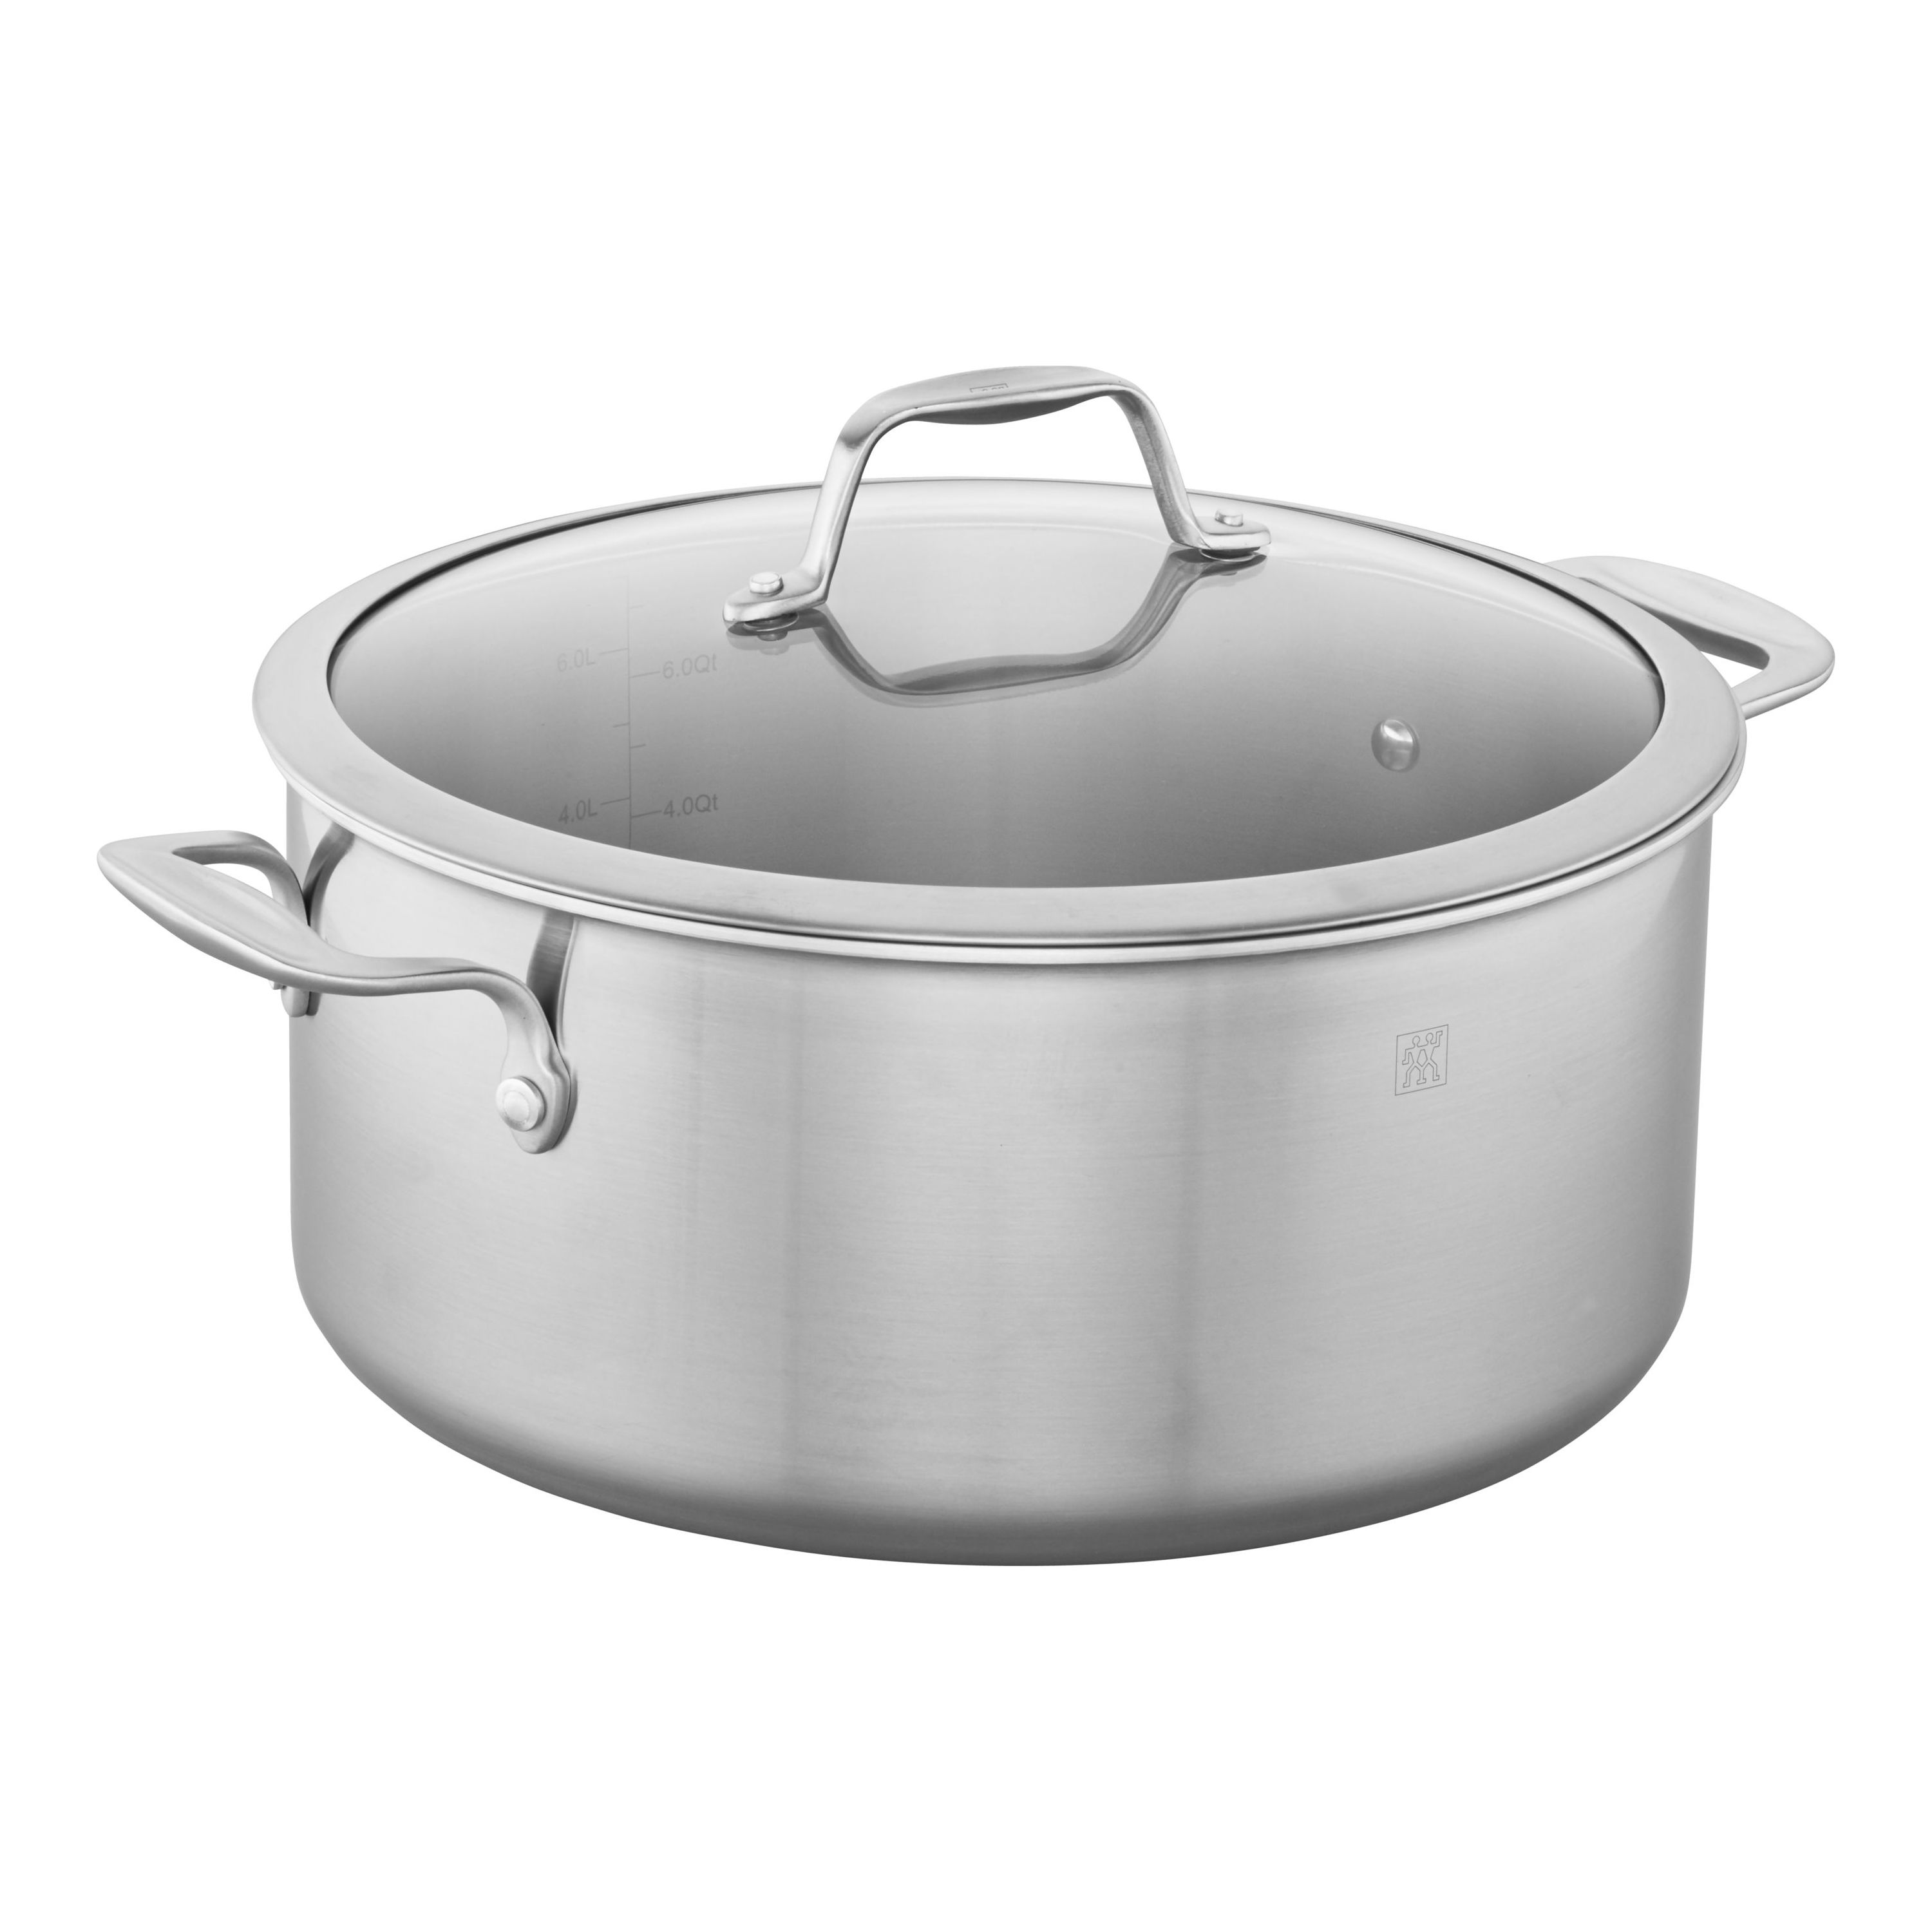 Zwilling Spirit 3 Ply 8 Qt Stainless Steel Dutch Oven Official